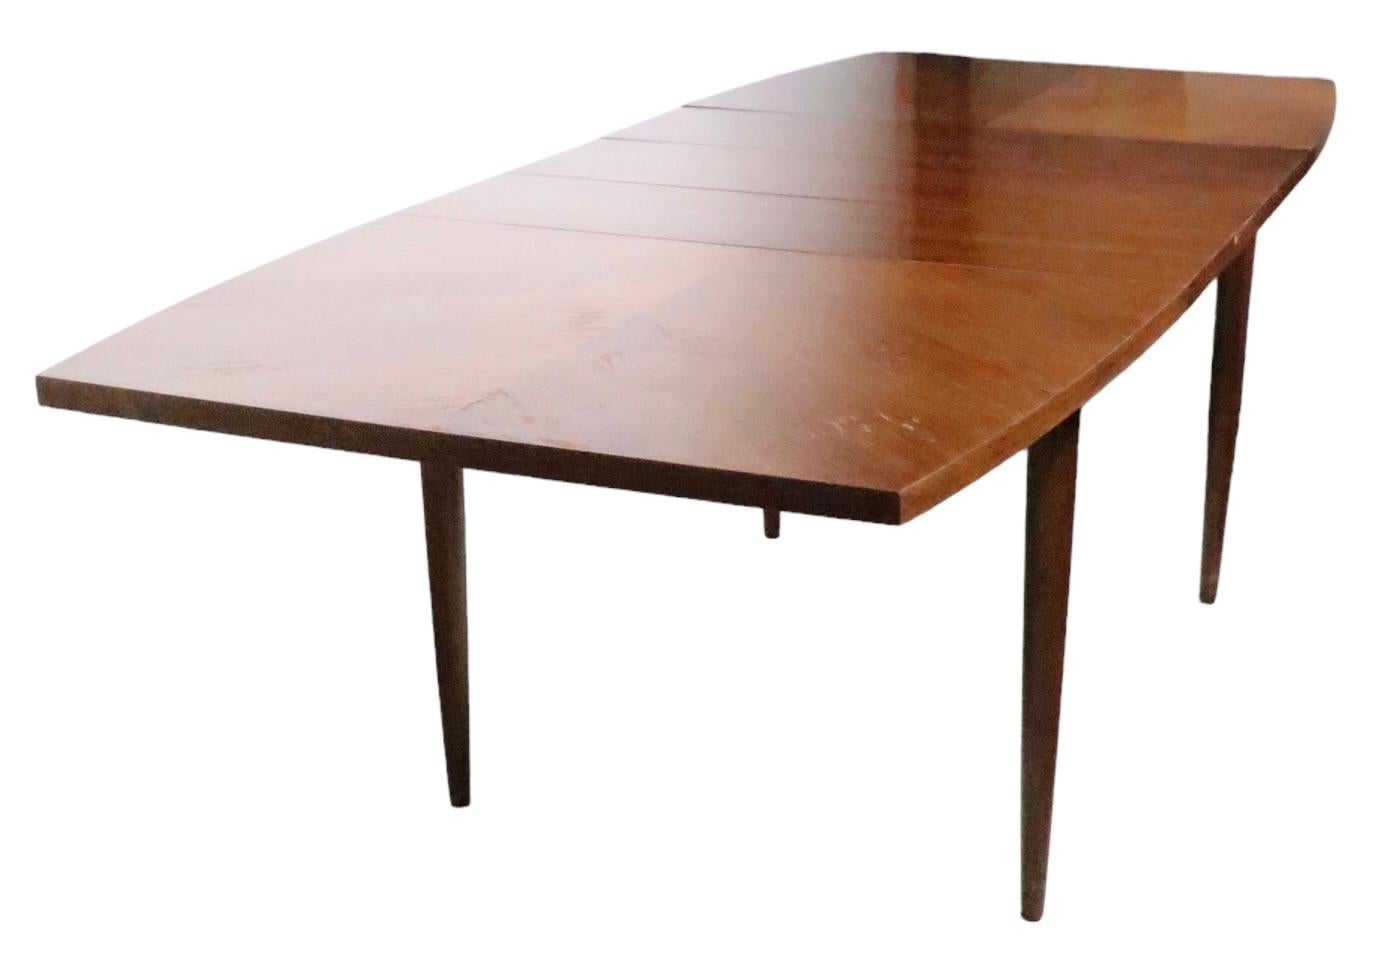 Classic Mid-Century Modern dining table designed by Merton Gershun for American of Martinsville, as part of their Classic Dania line, circa 1950s. The table features a boat shaped top, with book matched veneer, and comes with three large ( 12 inch )